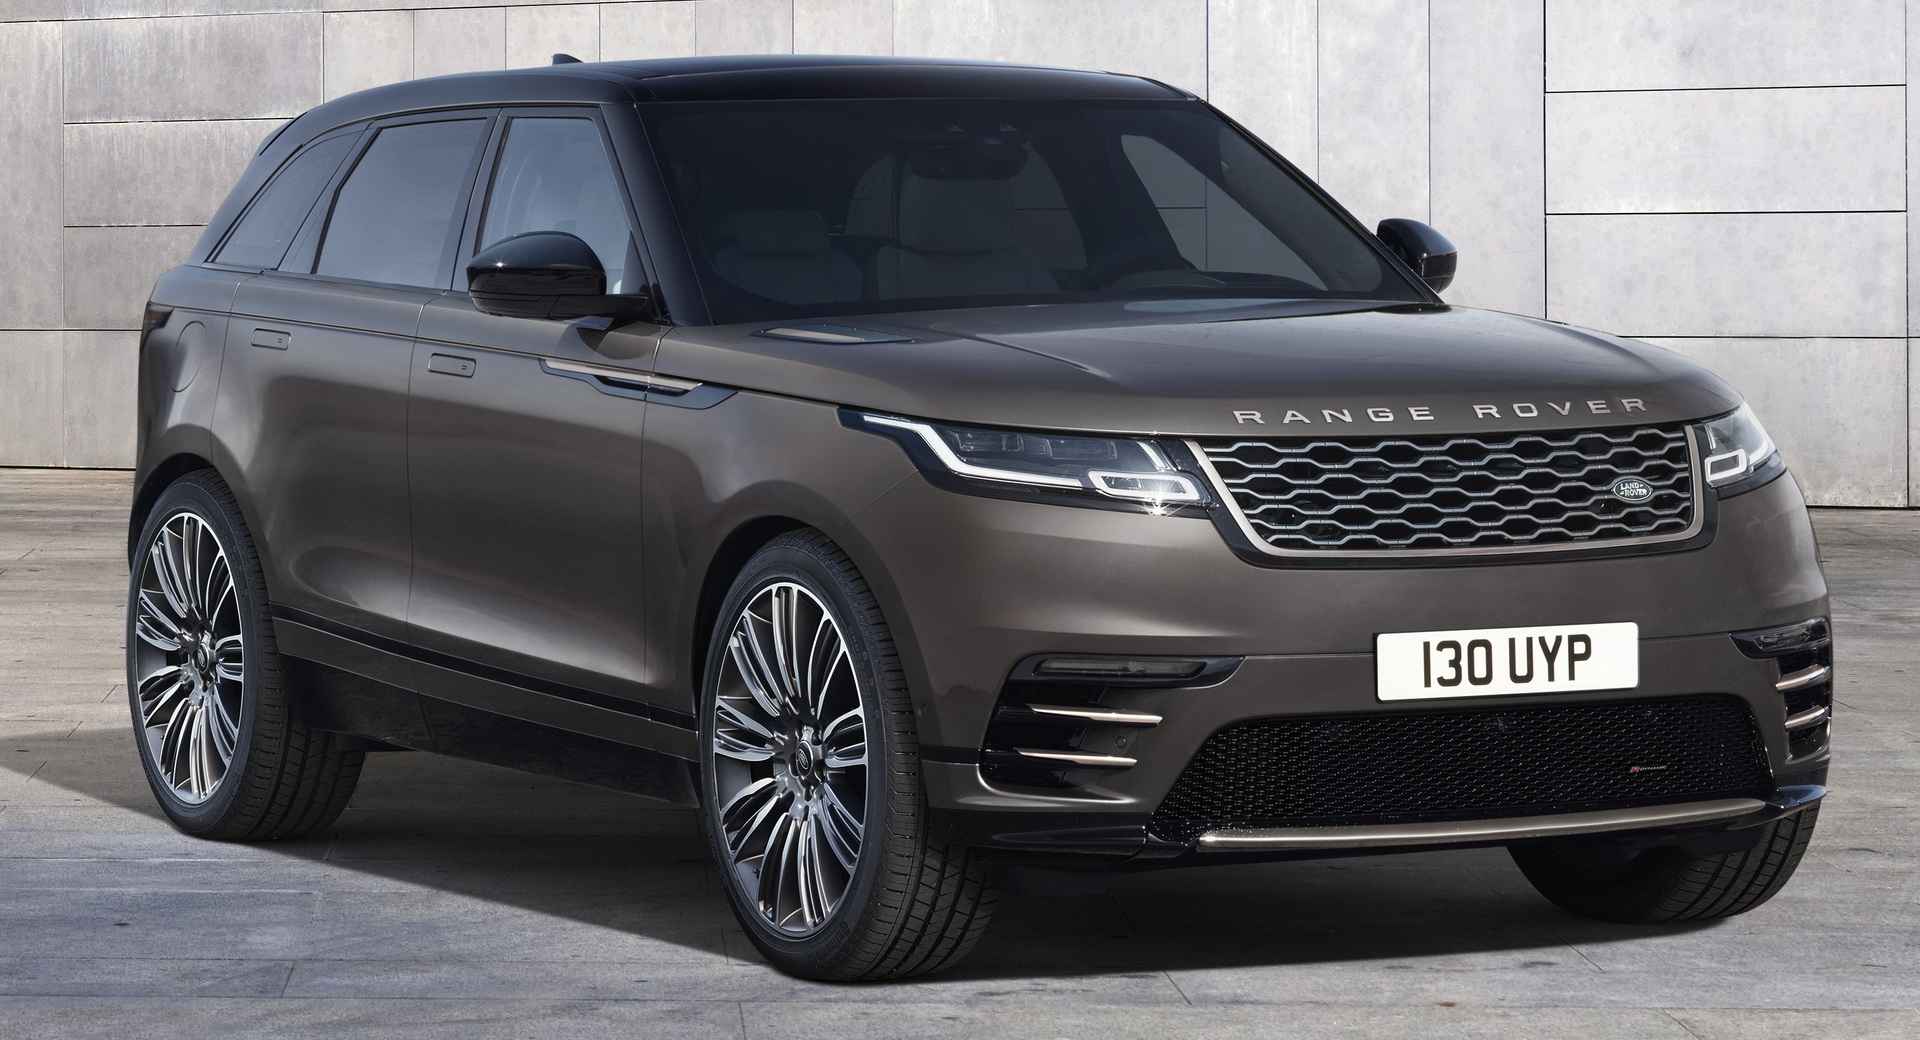 2022 Range Rover Velar Gains New Design Options And Over-The-Air-Updates |  Carscoops